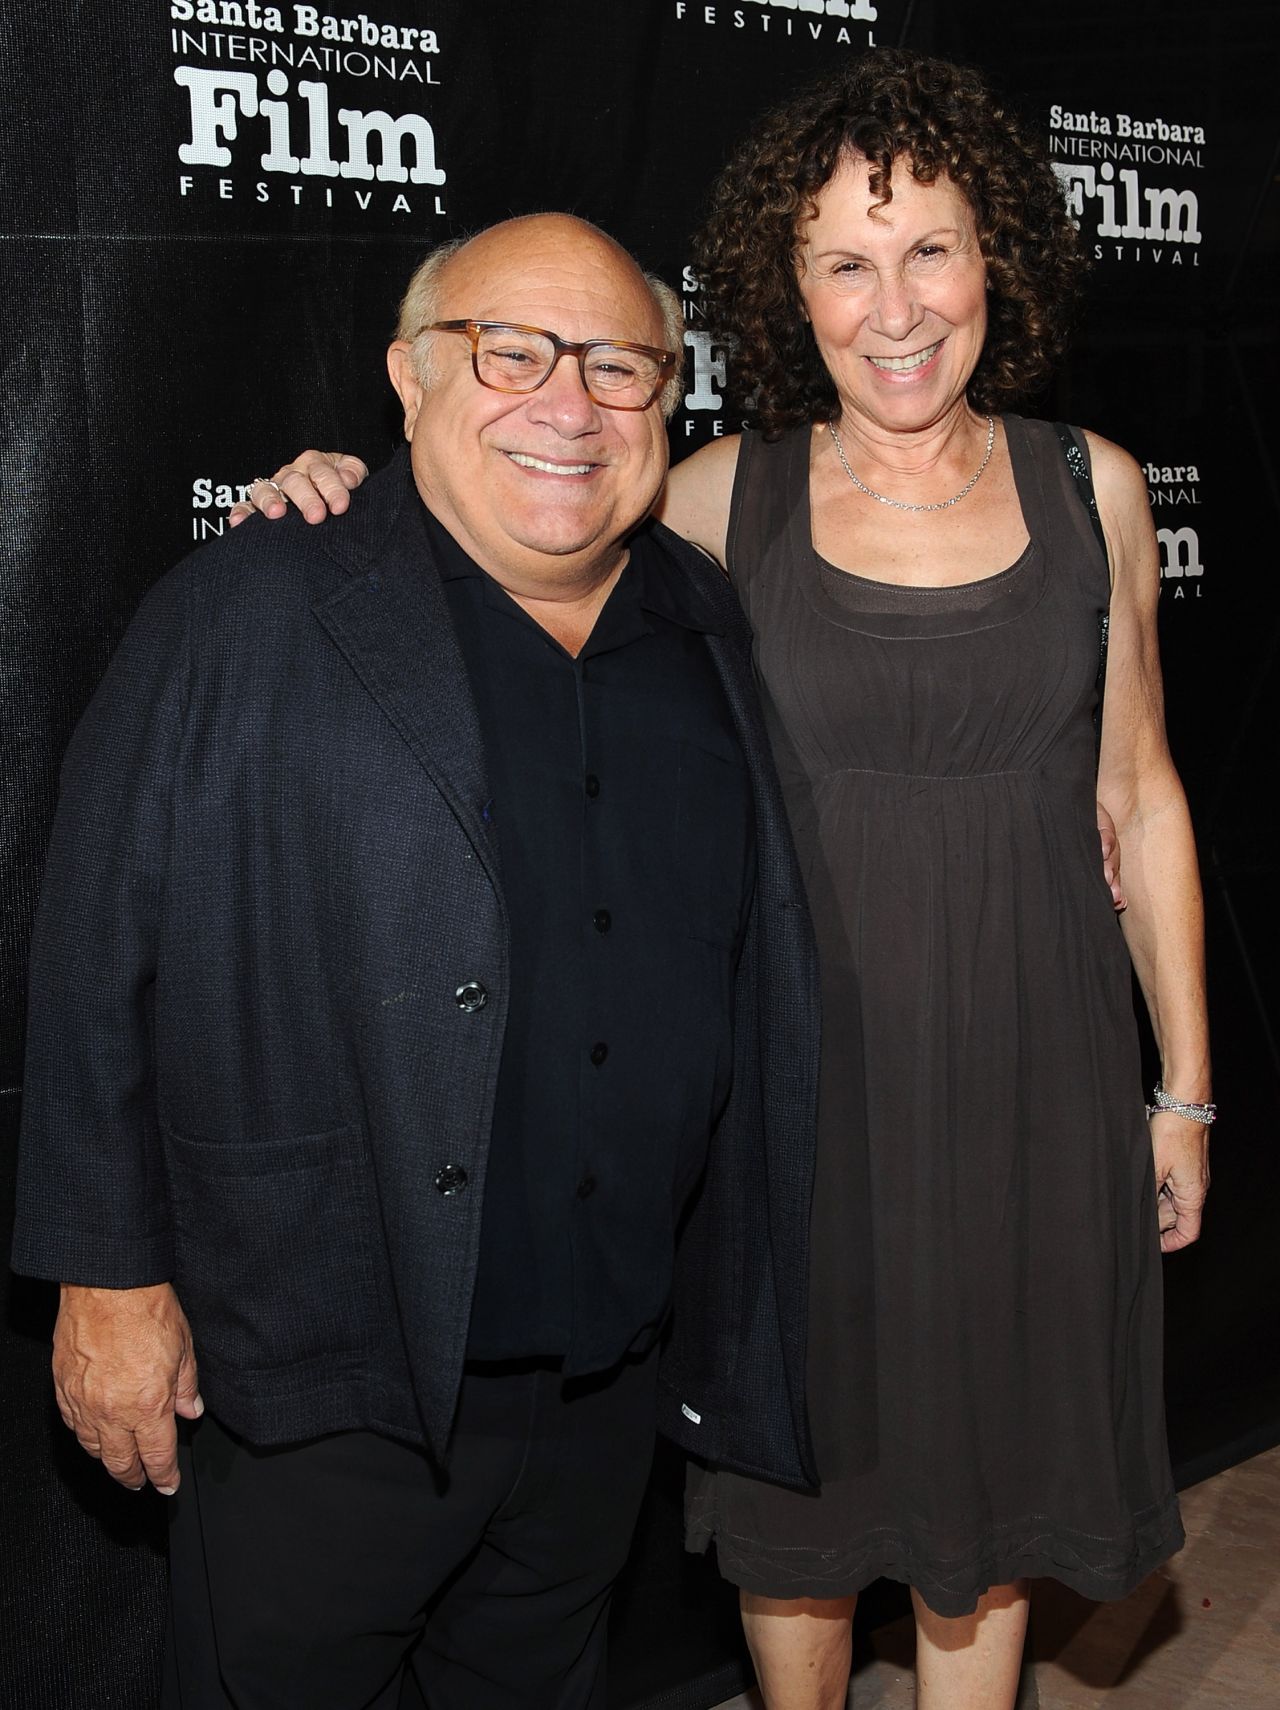 Danny DeVito and Rhea Perlman broke fans' hearts in October 2012 <a href="http://marquee.blogs.cnn.com/2012/10/08/danny-devito-rhea-perlman-separate/?iref=allsearch" target="_blank">when they announced that they were separating</a> after 30 years of marriage. <a href="http://www.people.com/people/article/0,,20682518,00.html" target="_blank" target="_blank">By March 2013</a>, though, the comedic couple was back together. 